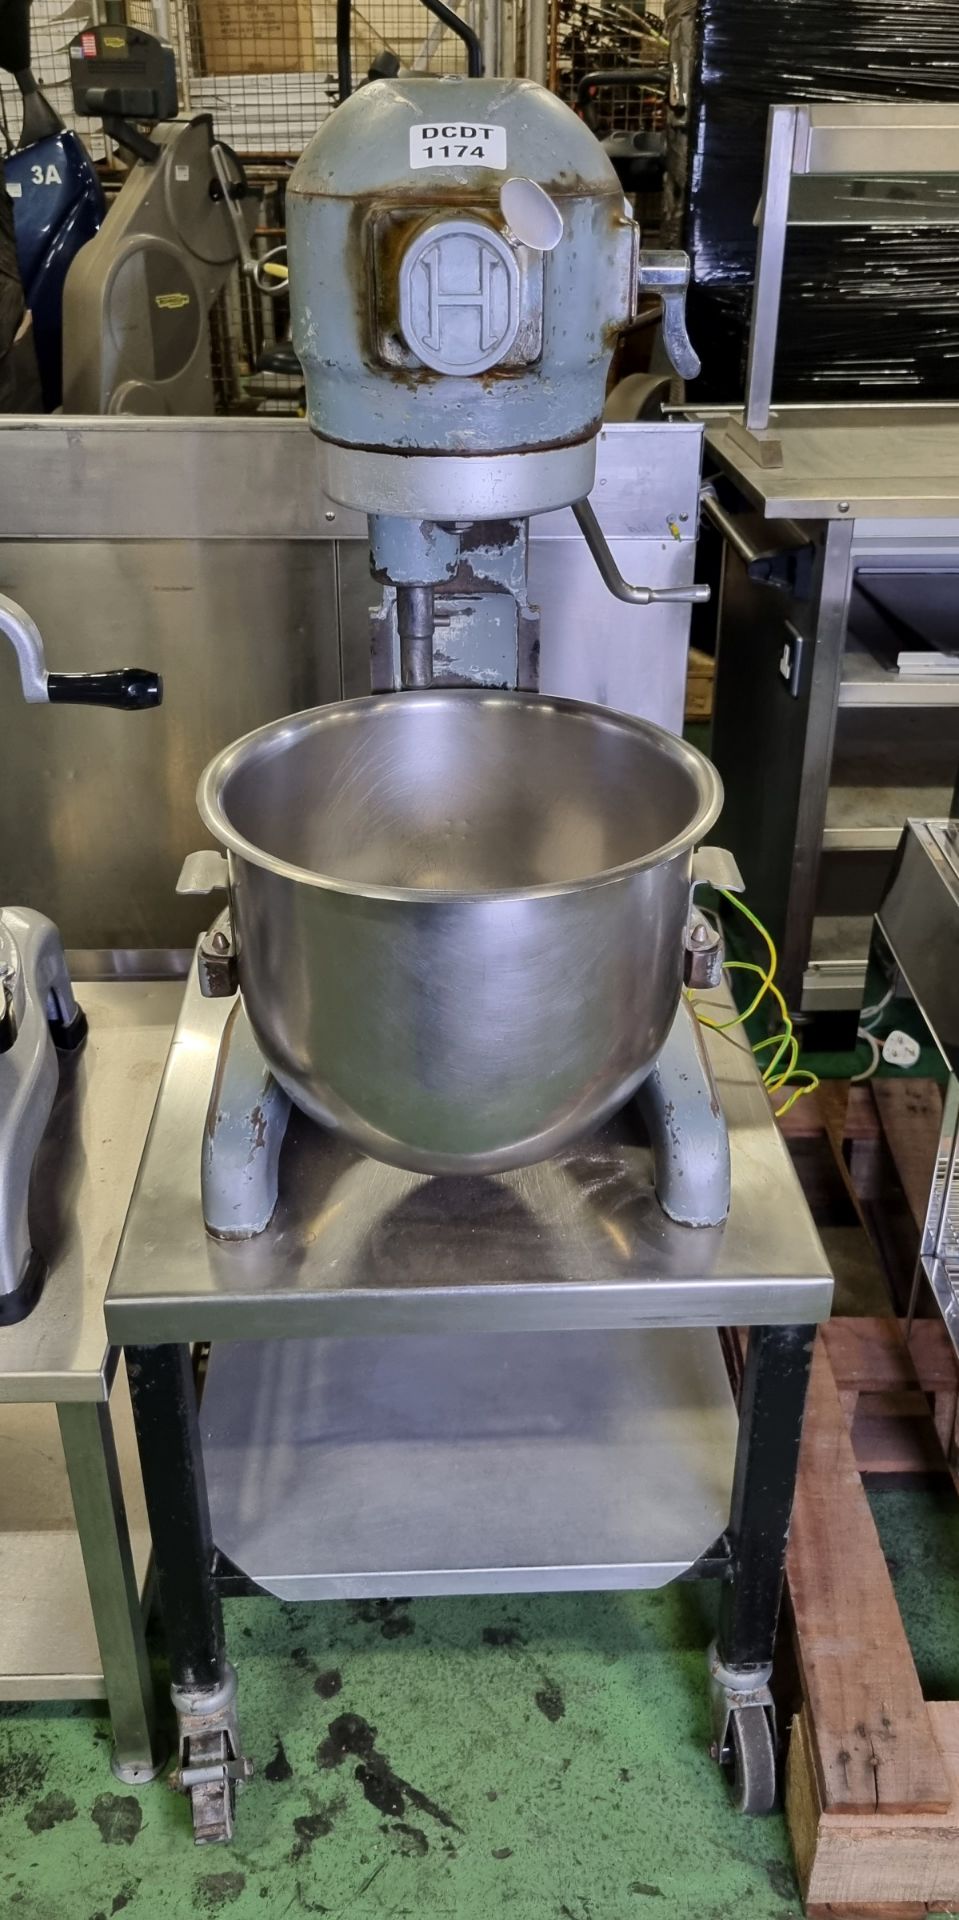 Hobart AE200 freestanding mixer on small stainless steel table with castors